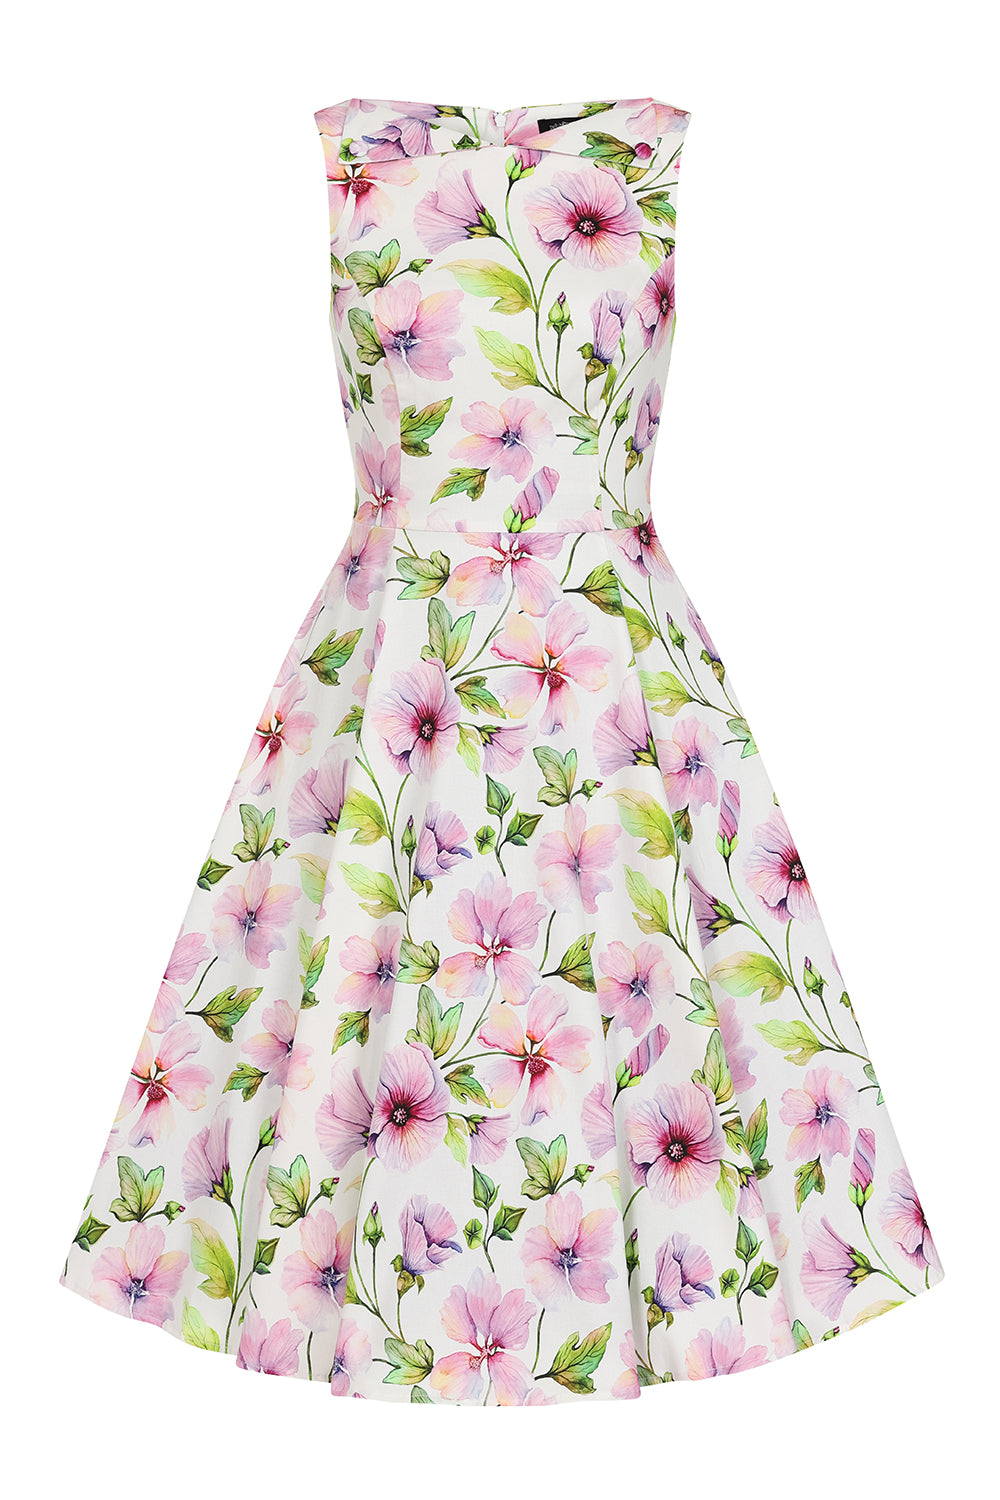 Naomi Floral Swing Dress by Hearts and Roses